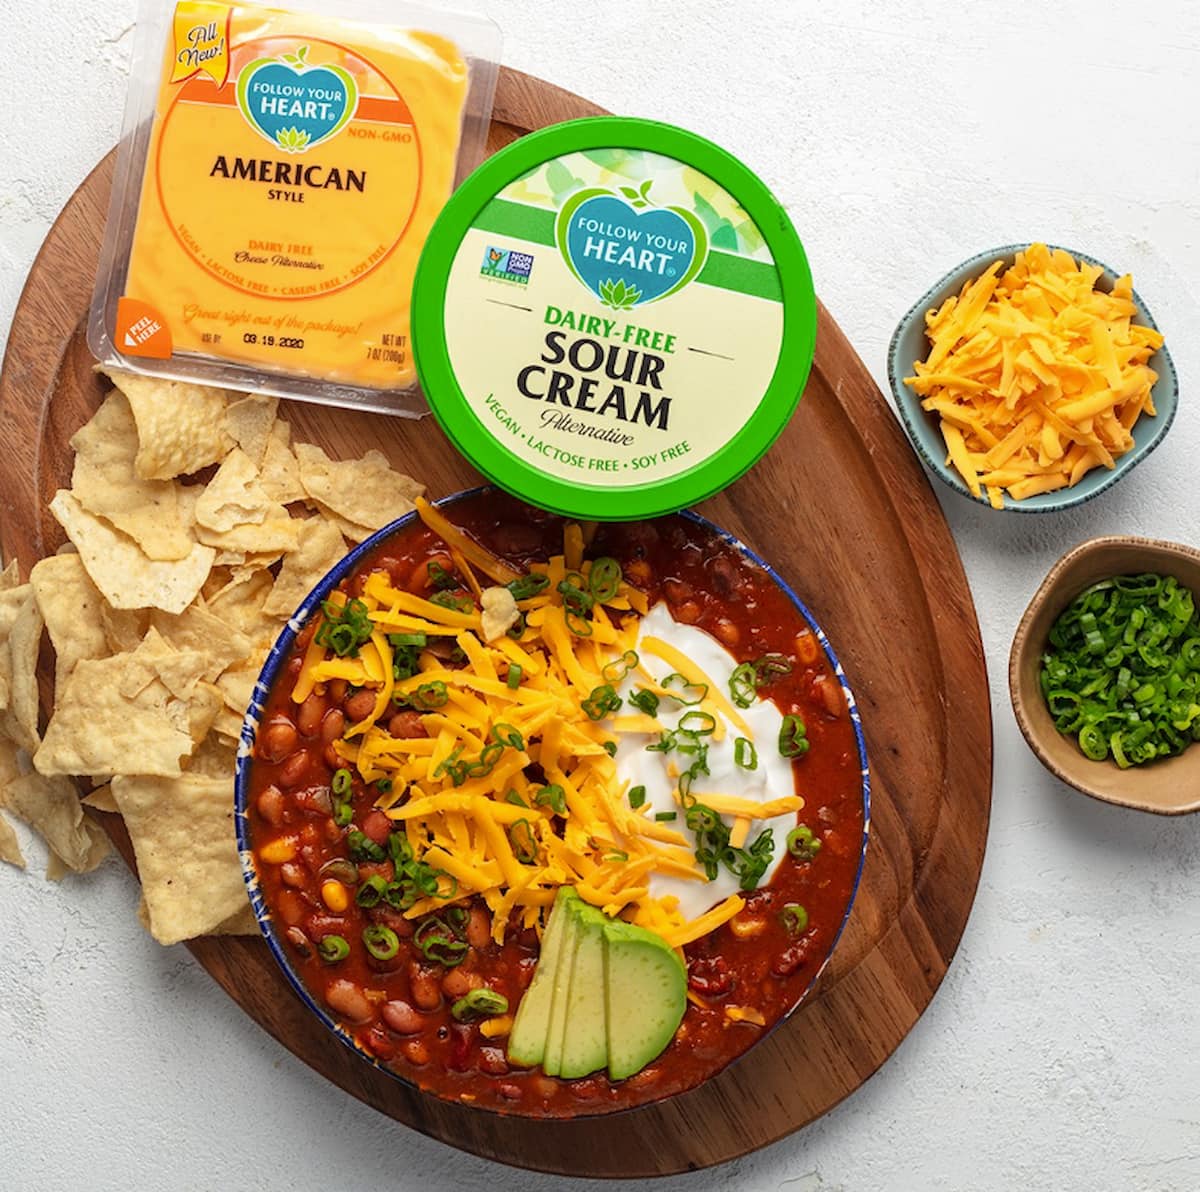 Follow Your Heart dairy-free sour cream next to a follow of vegan chili.